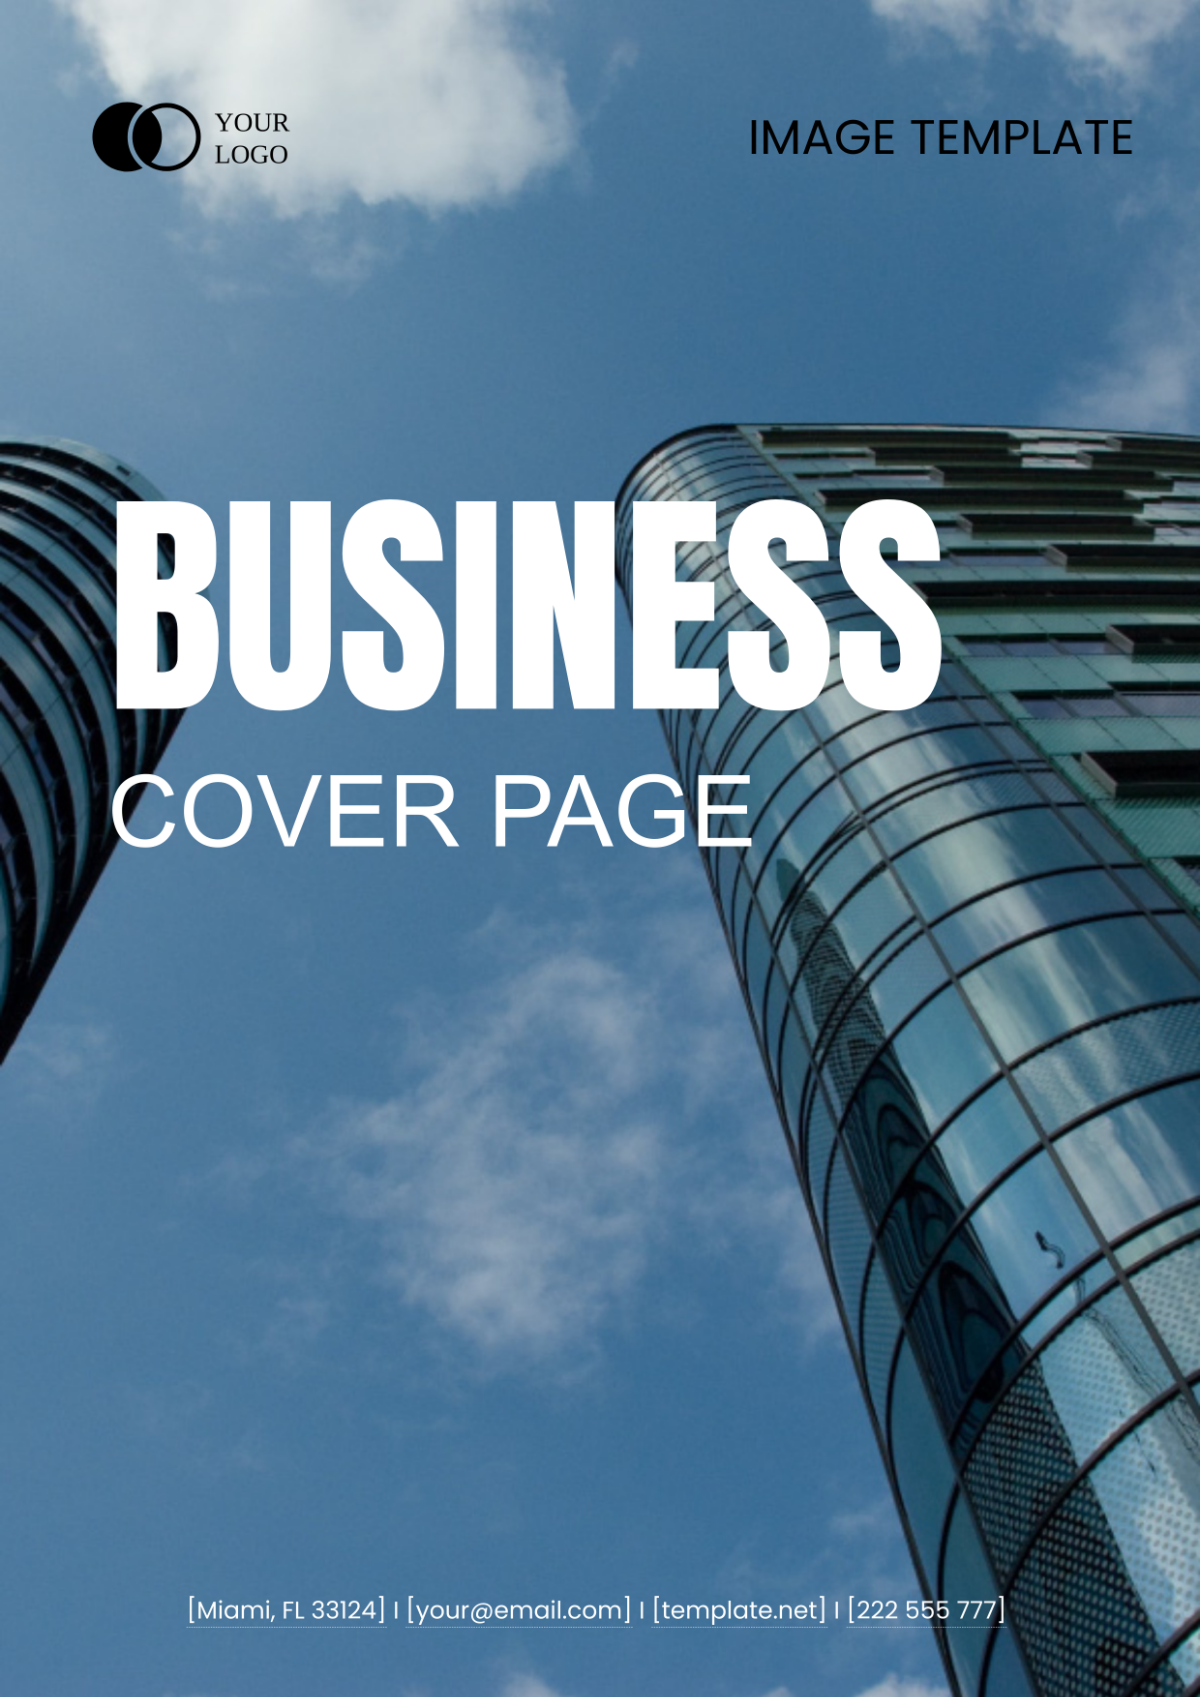 Free Business Cover Page Image Template